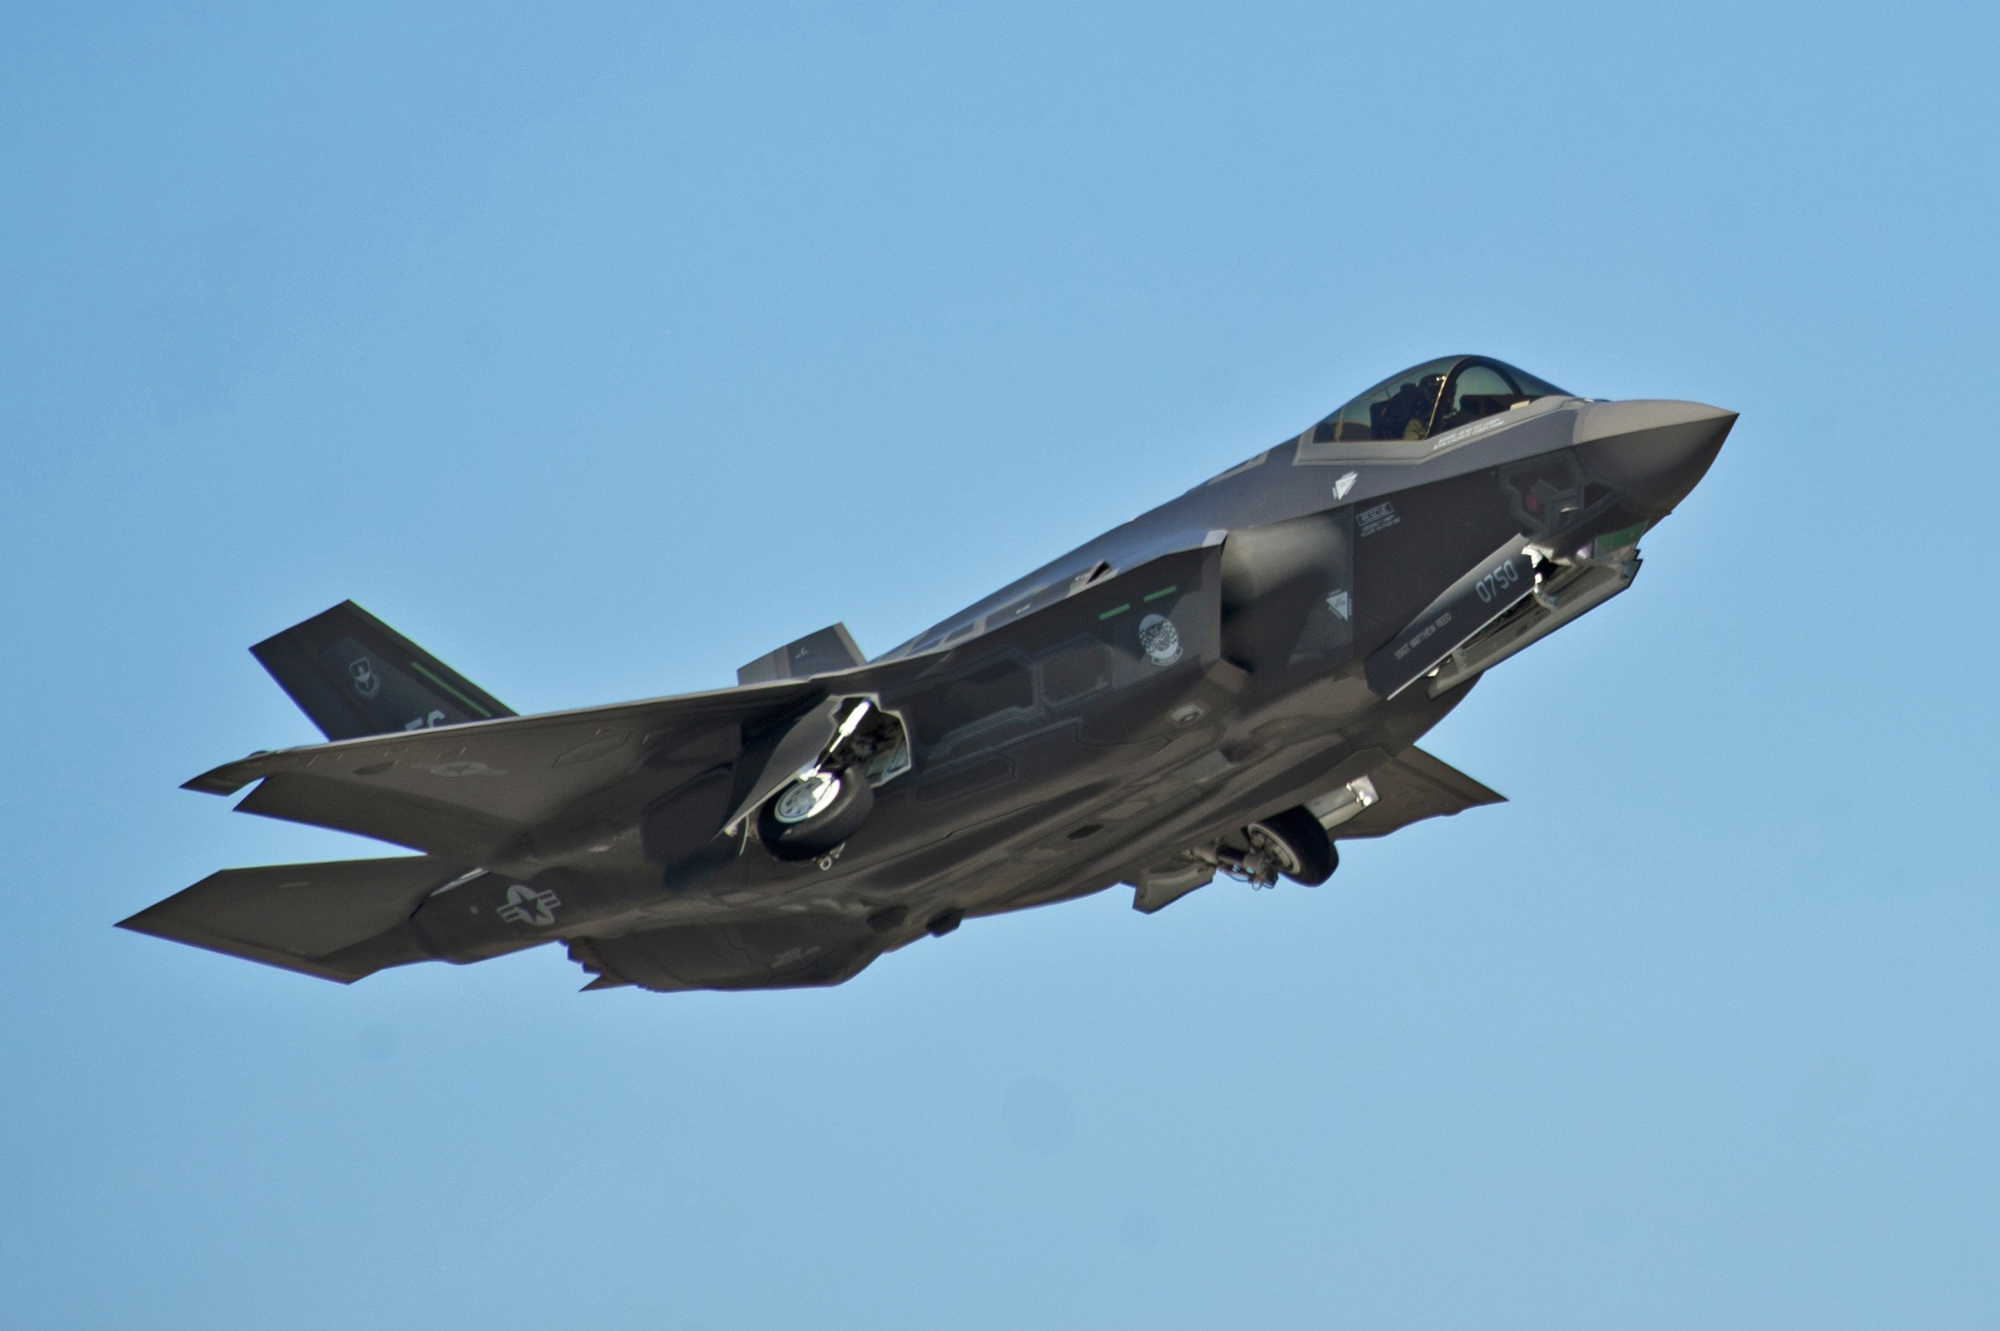 An F-35A Lightning II Joint Strike Fighter takes off on a training sortie at Eglin Air Force Base, Florida in 2012. (Randy Gon—U.S. Air Force/Reuters)